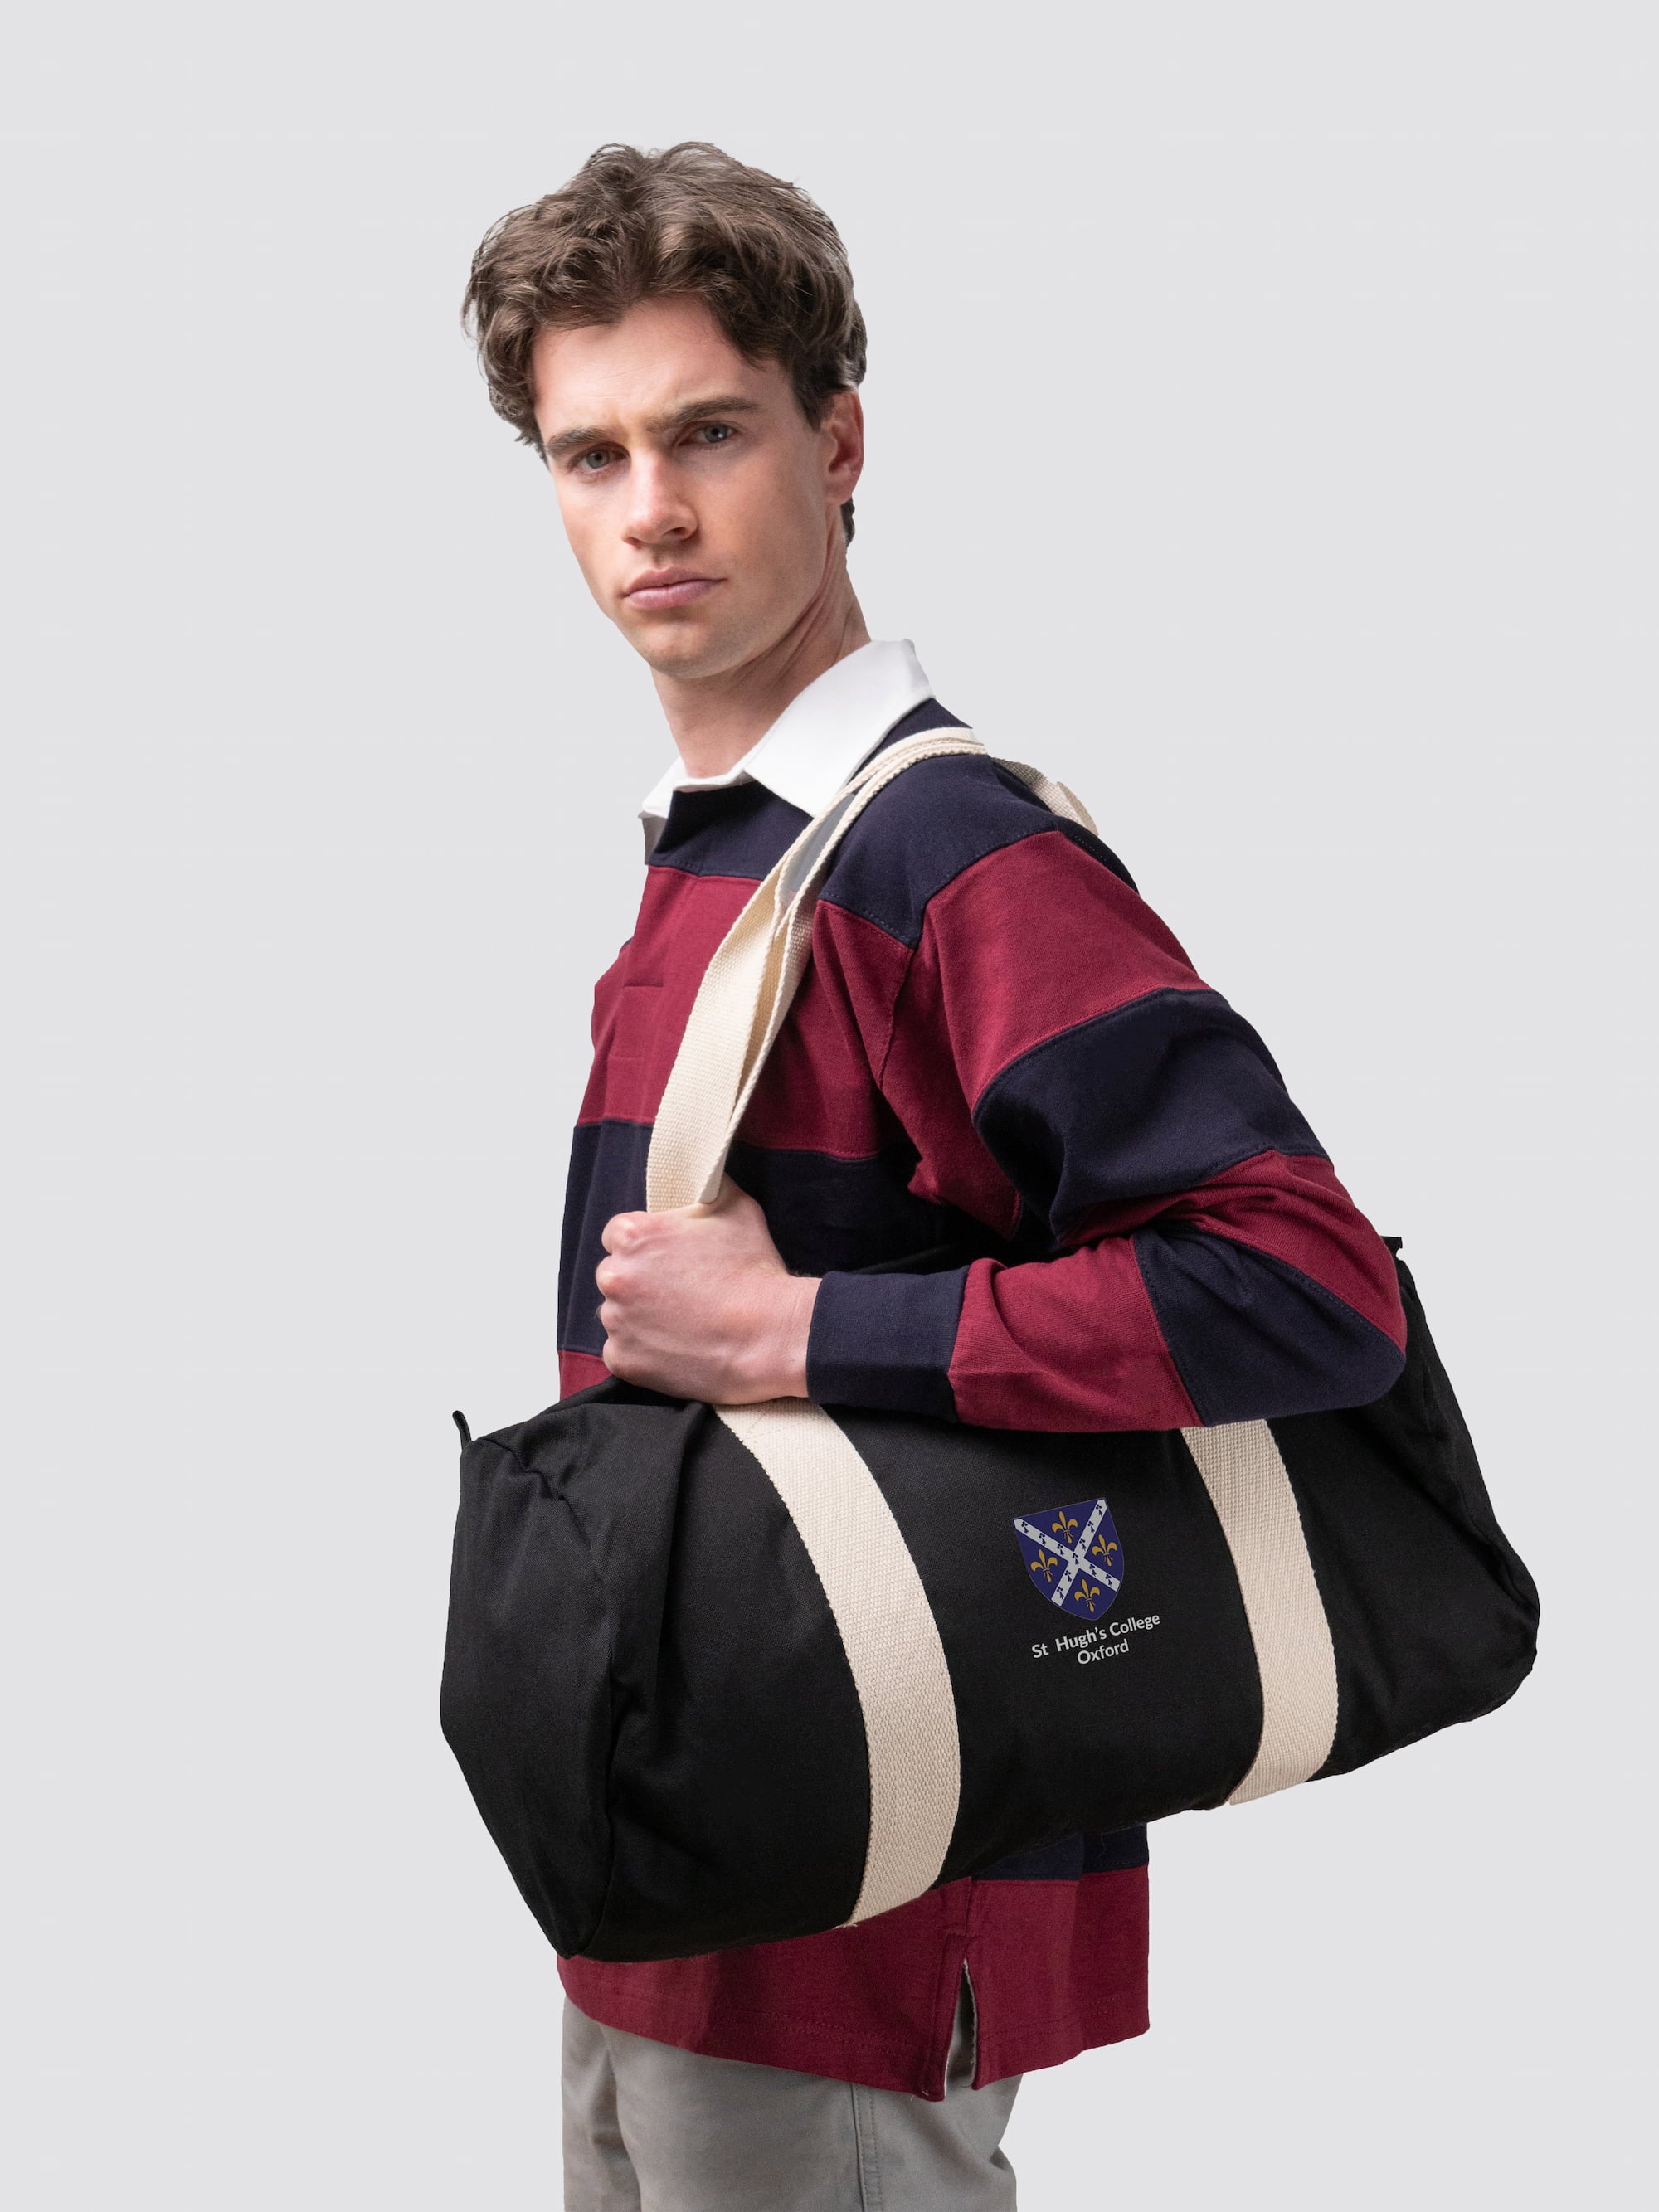 Contrast stripe student barrel bag, made from organic cotton canvas